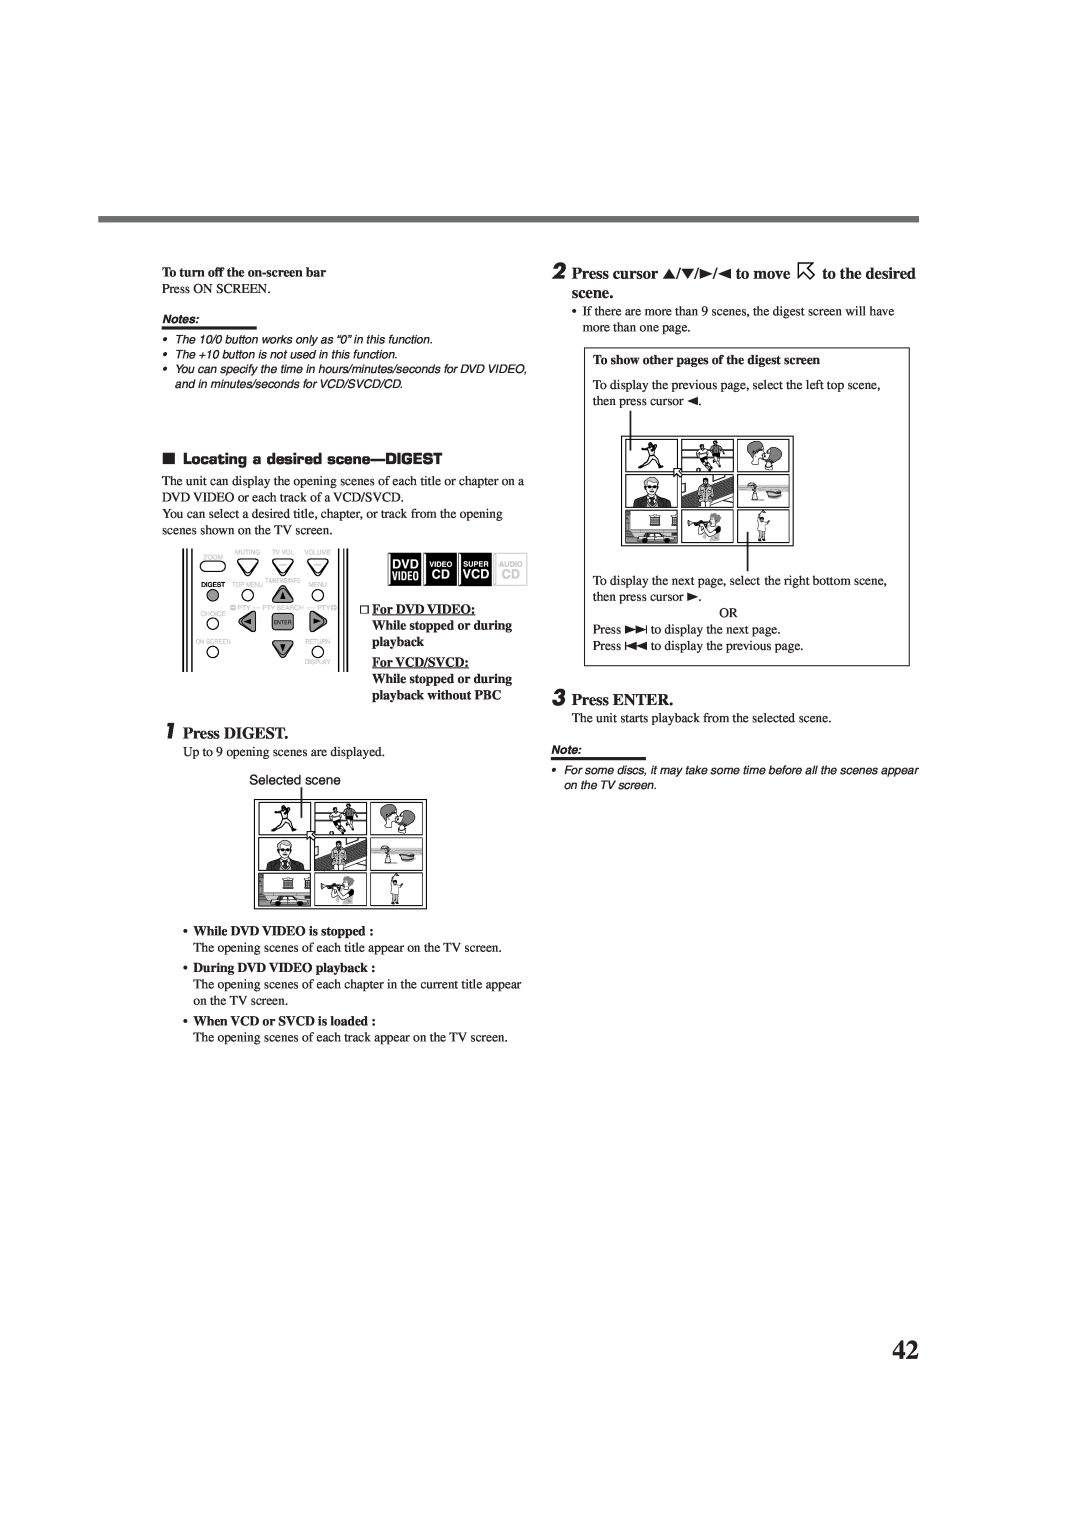 JVC RX-DV3RSL manual 1Press DIGEST, 3Press ENTER, 7Locating a desired scene-DIGEST, For DVD VIDEO, While stopped or during 